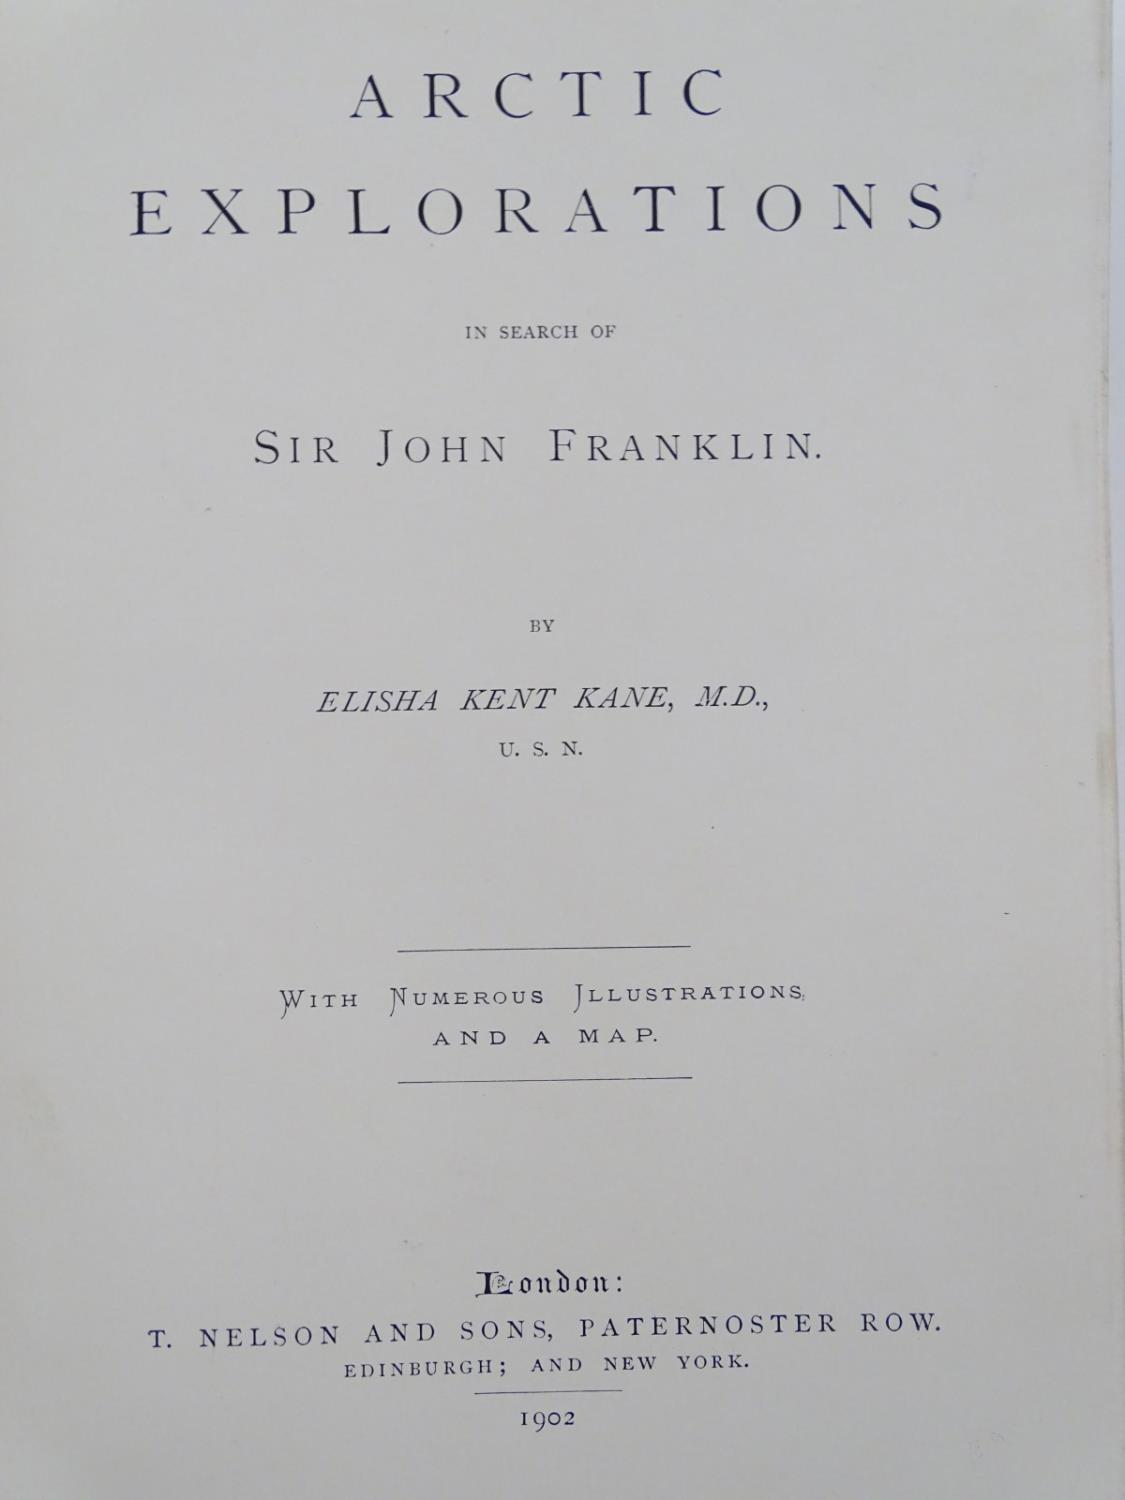 Book: Kane's Arctic Explorations: In Search of Sir John Franklin, by Elisha Kent Kane, M.D., with - Image 3 of 6